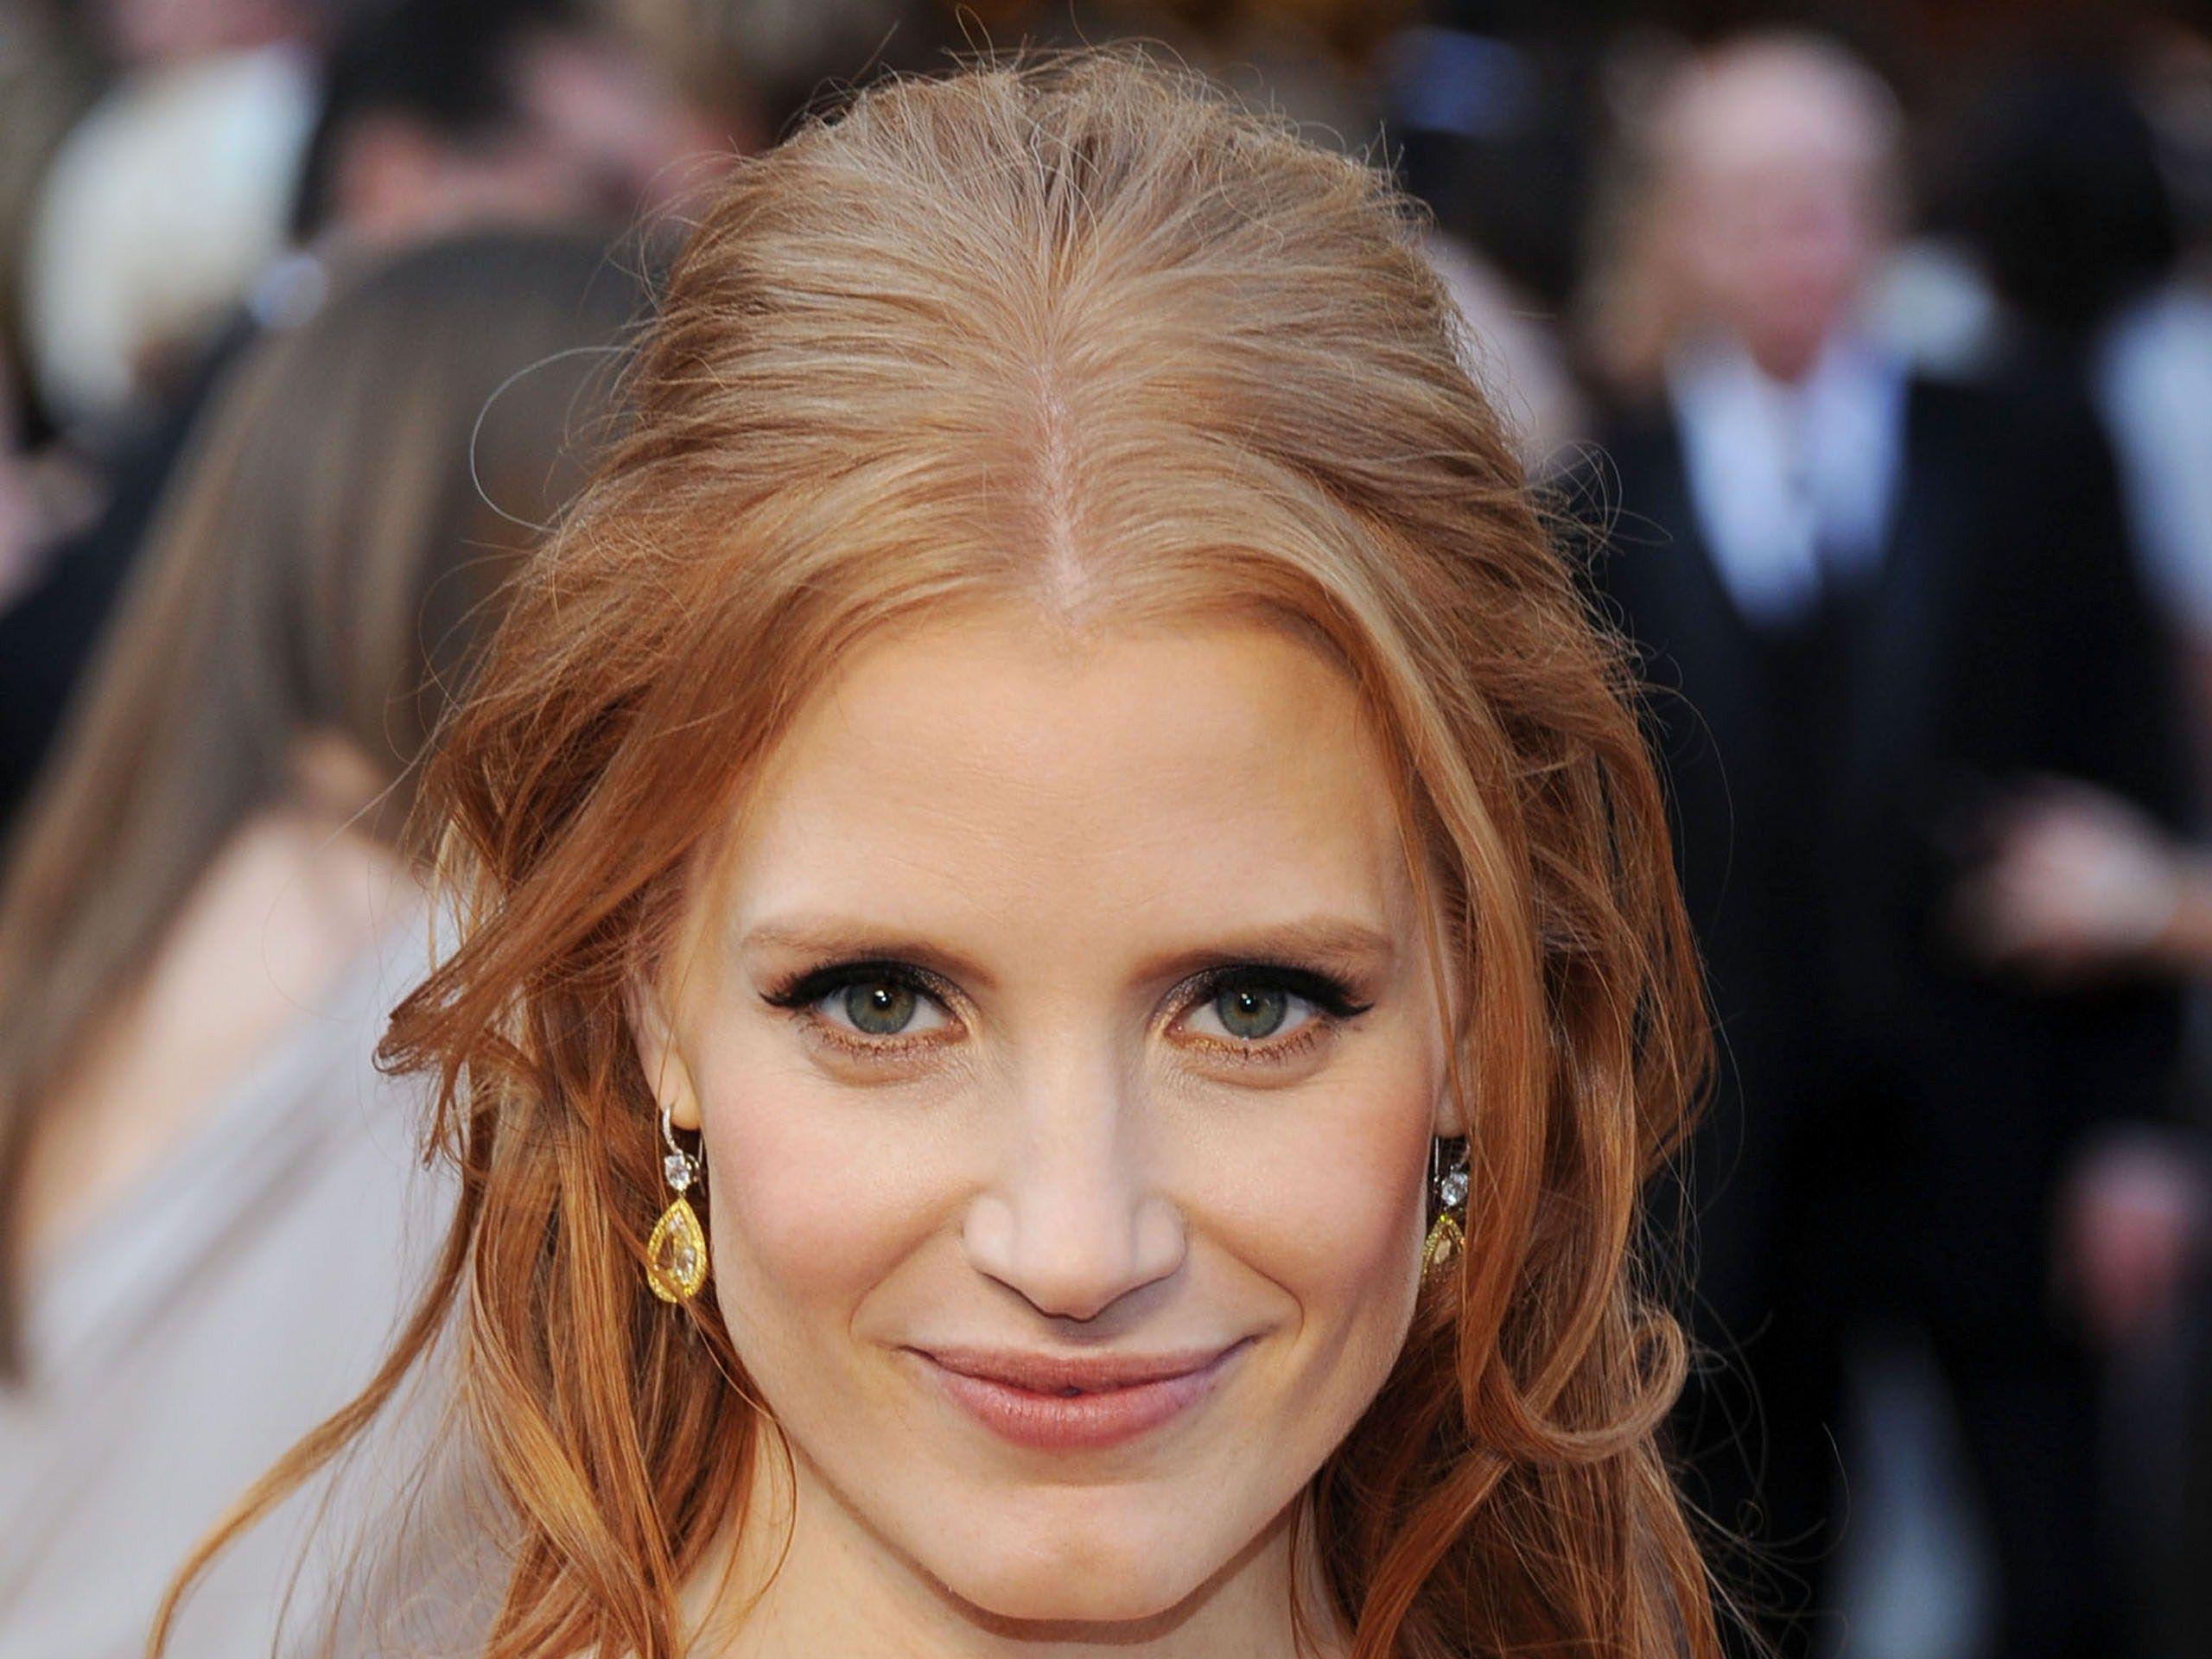 Jessica Chastain The Beautiful and Hottest Celebrities of All Time